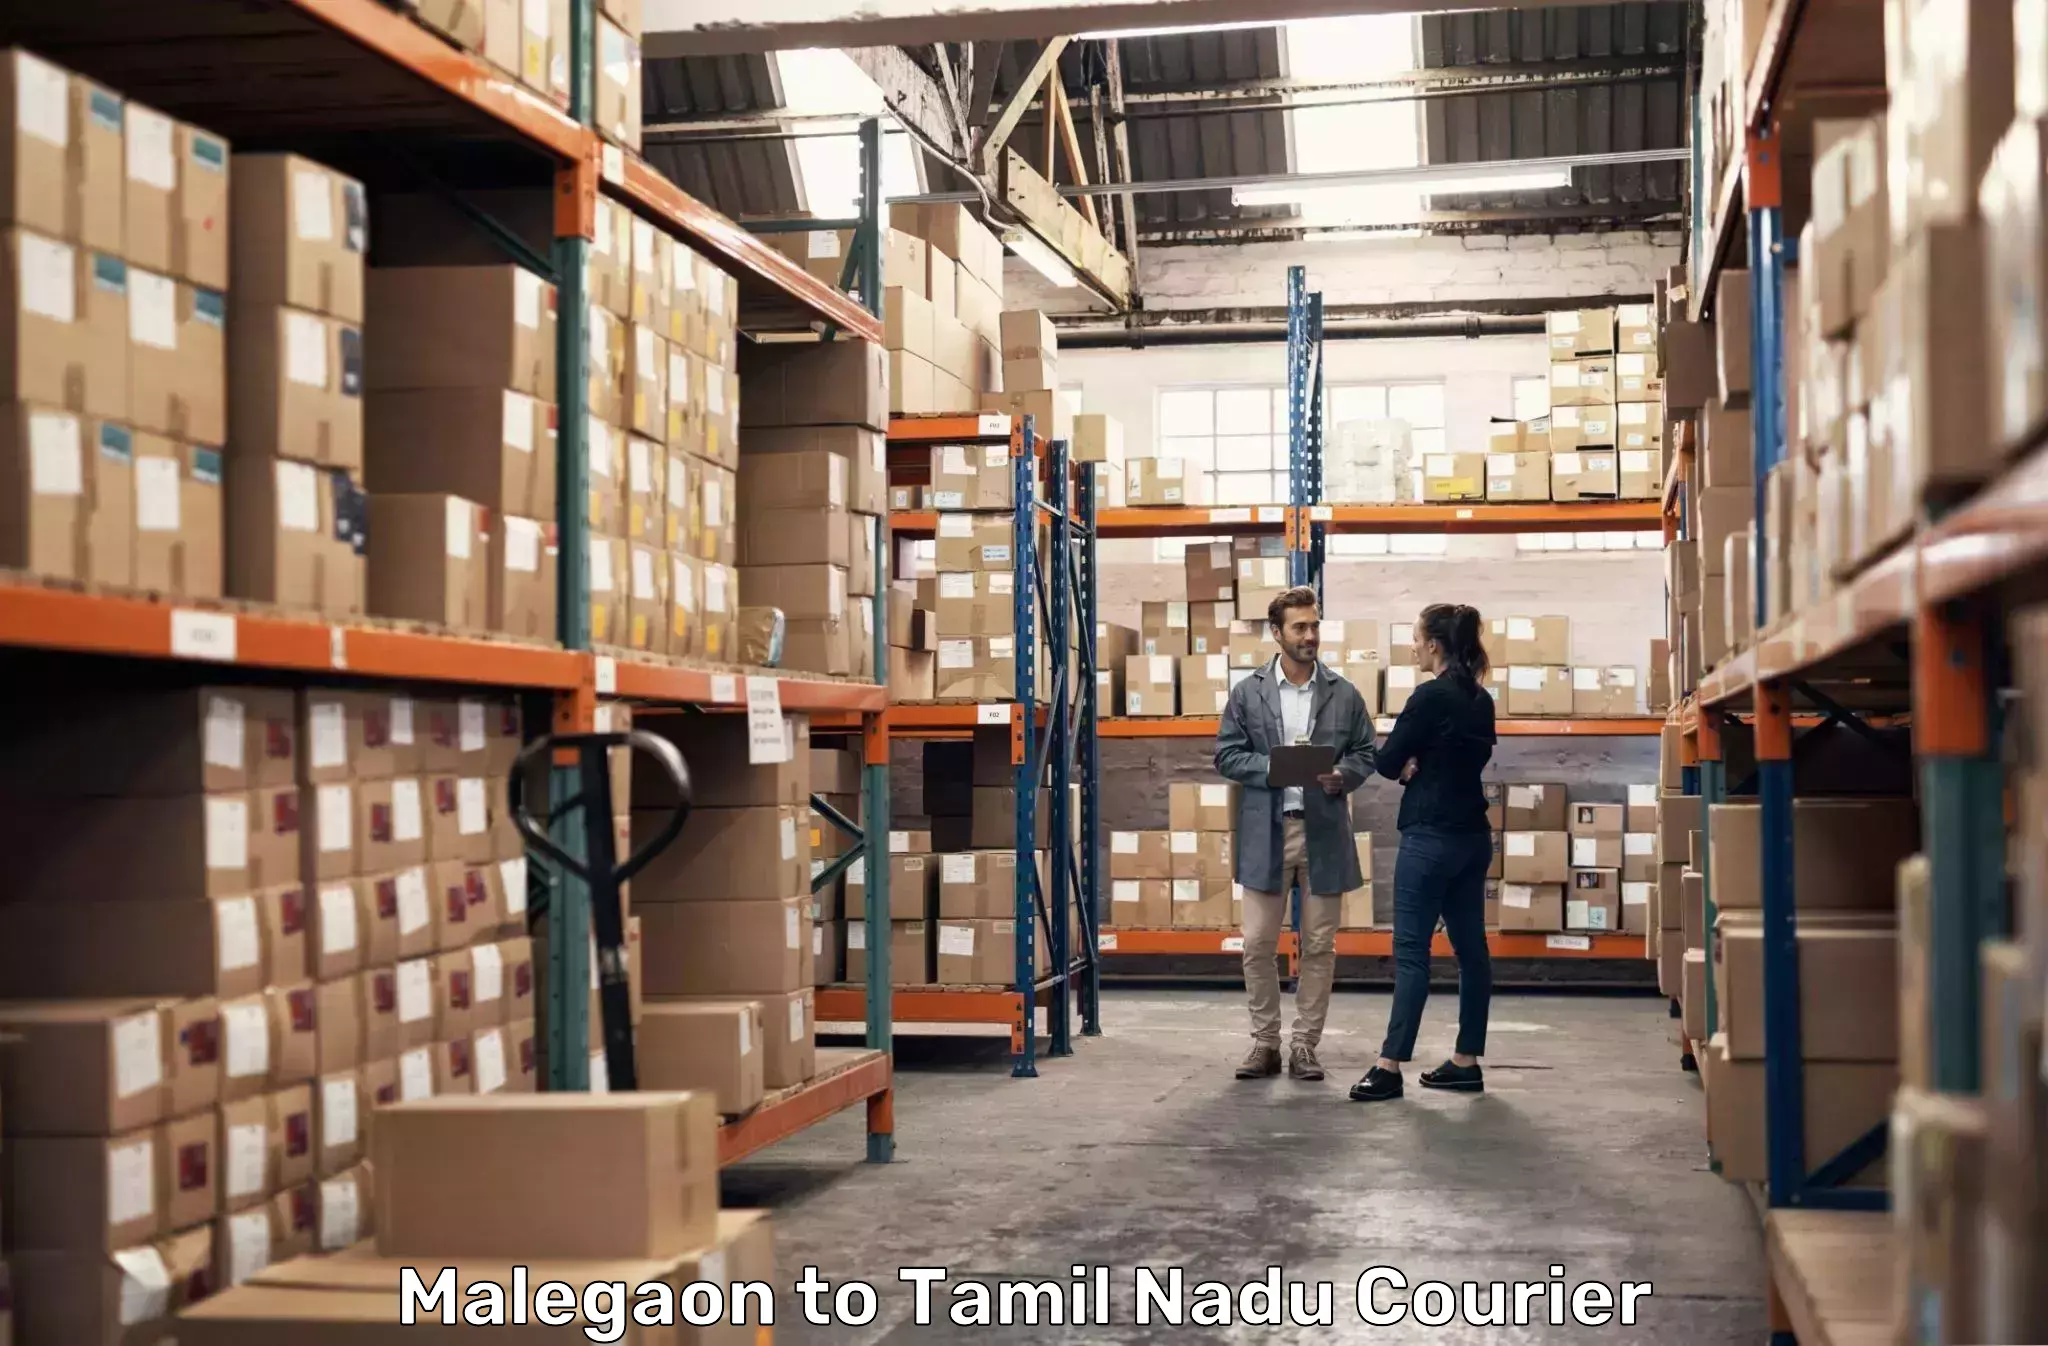 Courier service booking Malegaon to Tamil Nadu